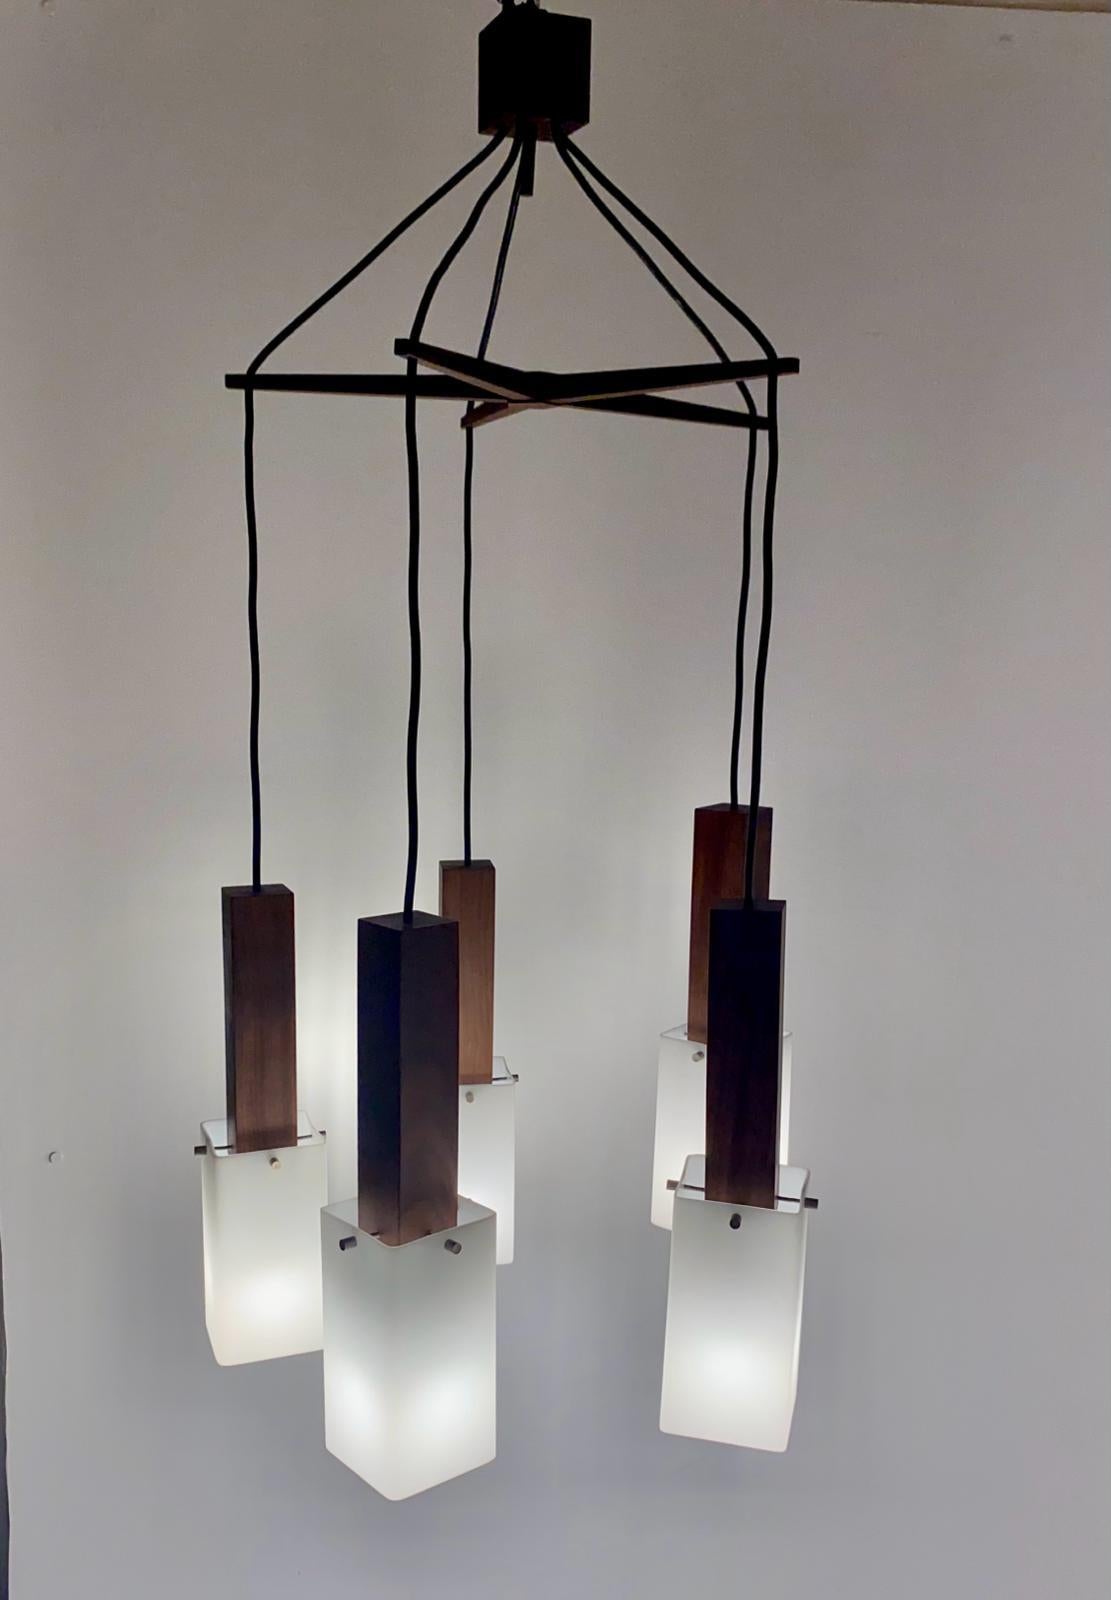 Rare vintage wood five spot Hanging lamp manufatured by Guzzini, Italy in the 1960 's.

Solid wood frame and plexiglass lampshades. Nicely refined dark colored teak wood structure and intect lampshades. Elegant wood finishing and lampshades details.